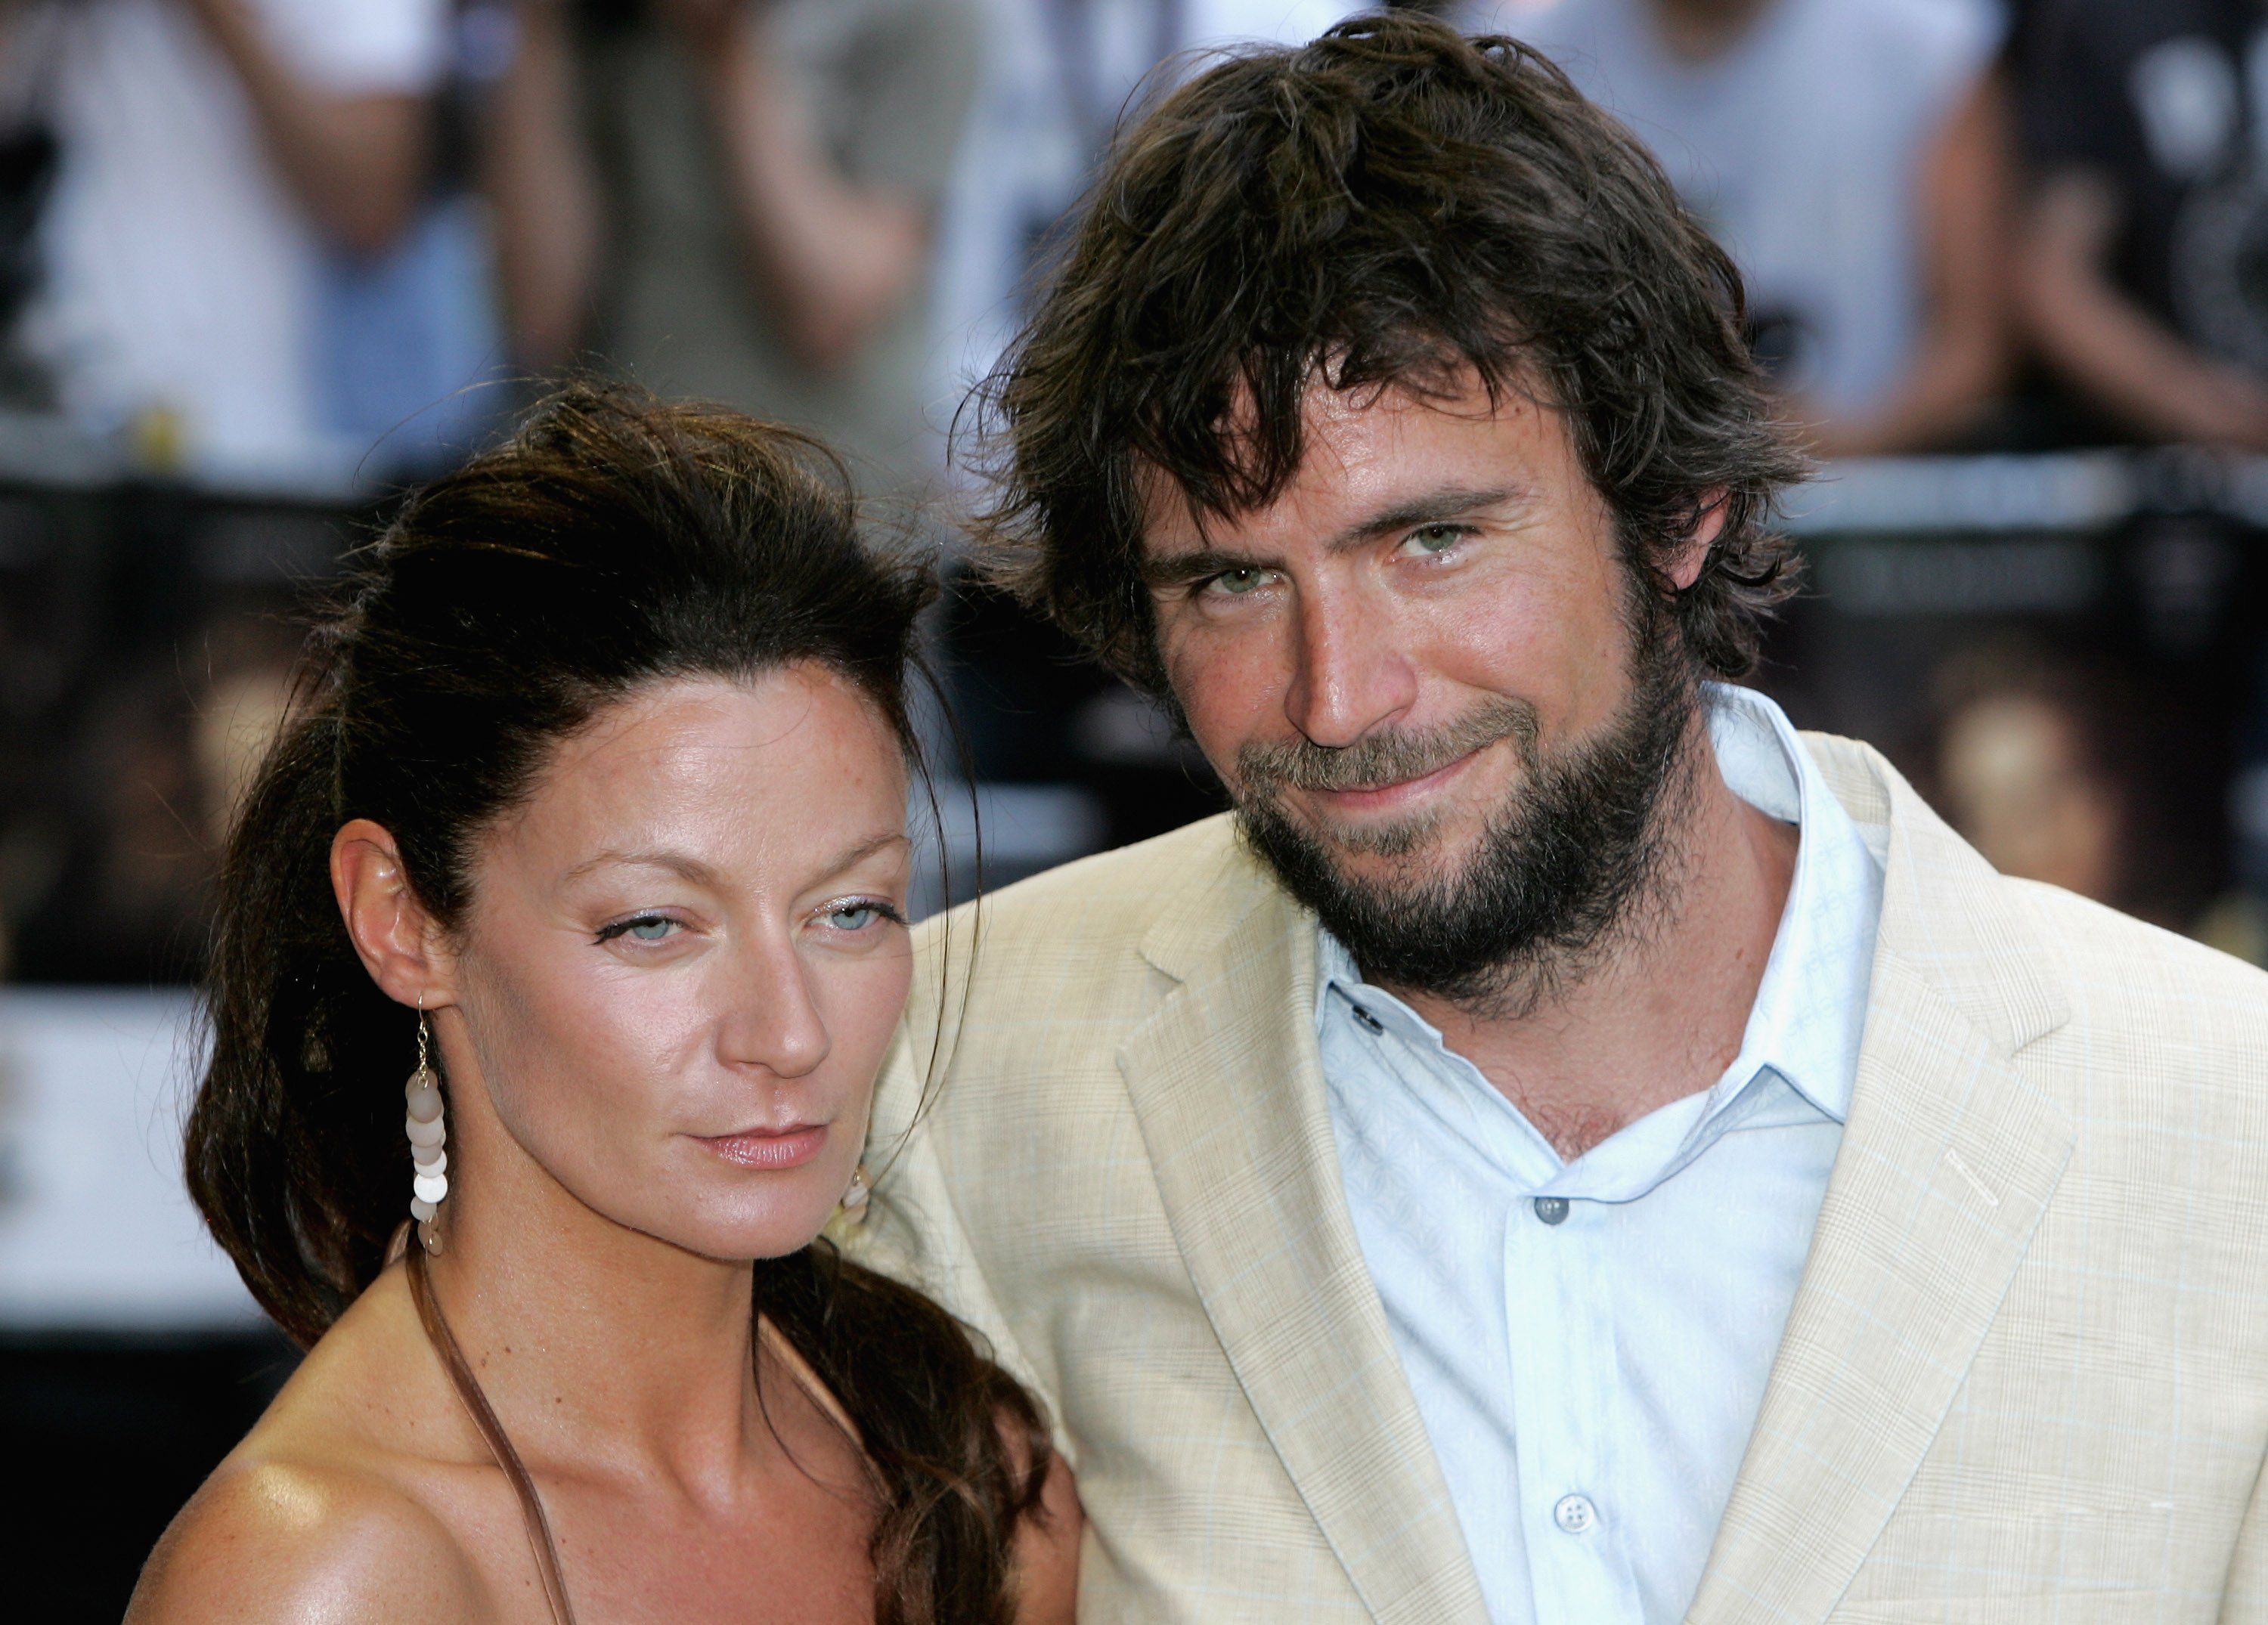 Jack Davenport and Michelle Gomez at the premiere of 'Pirates Of The Caribbean: Dead Mans Chest' in 2006 in London, England | Source: Getty Images